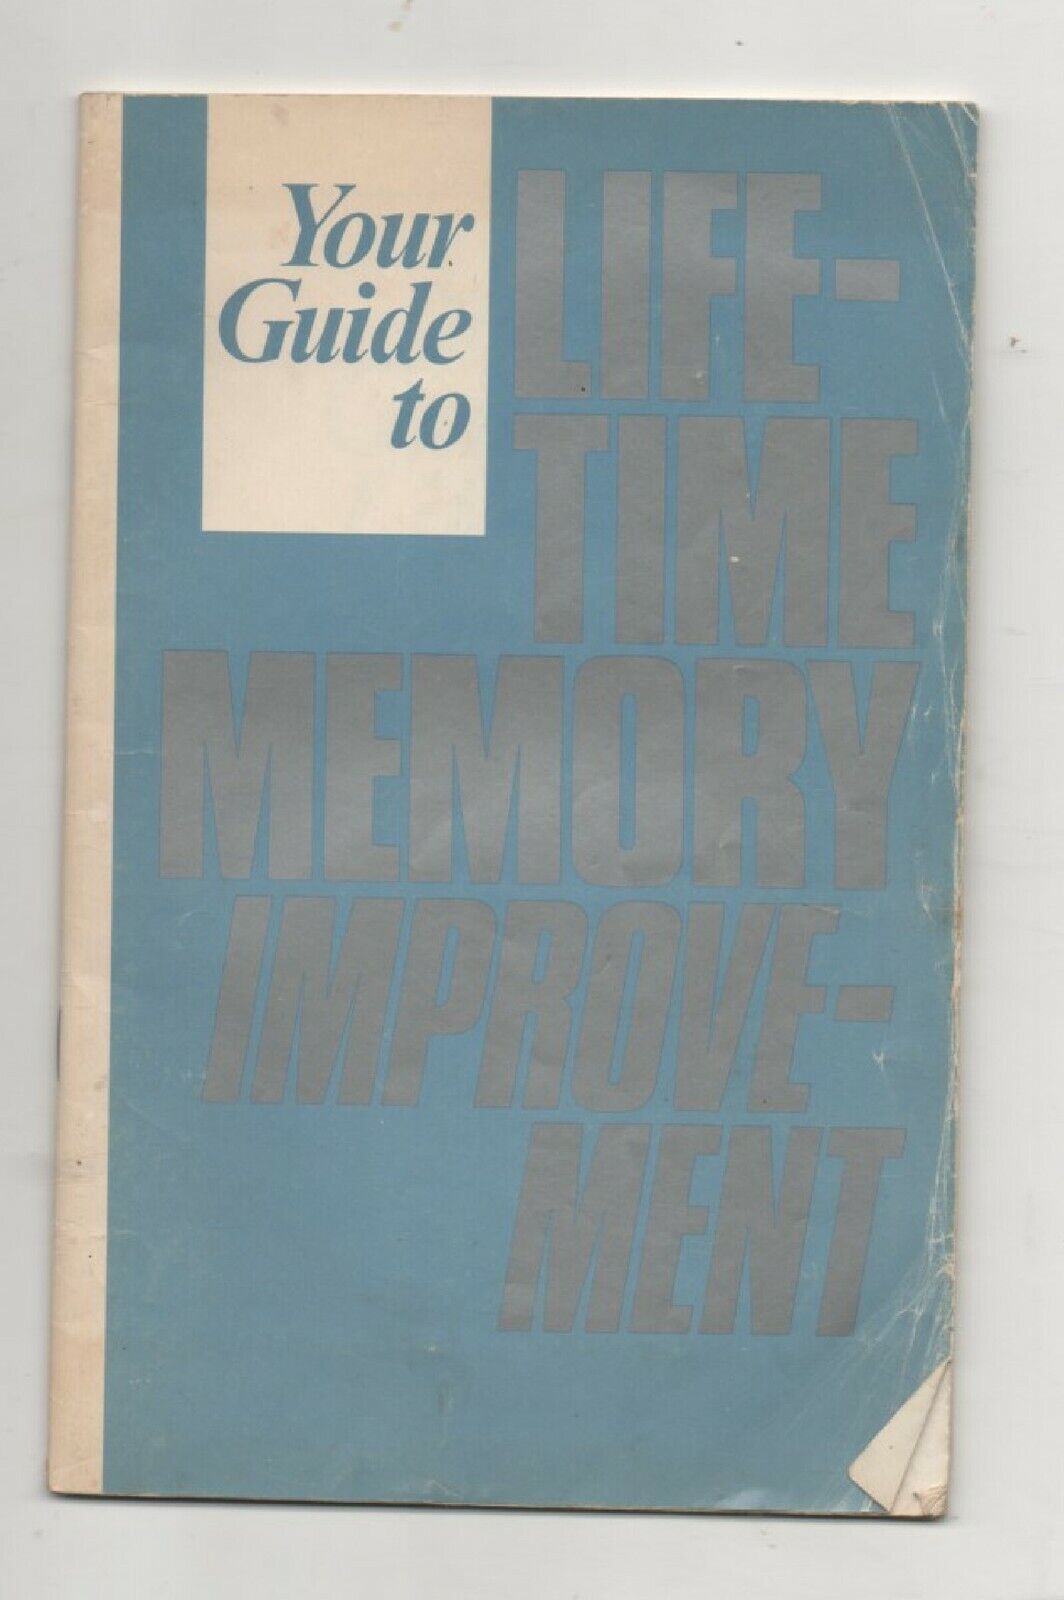 Booklet For Your Guide To Lifetime Memory Improvement By Roger Yepsen Jr.  1986